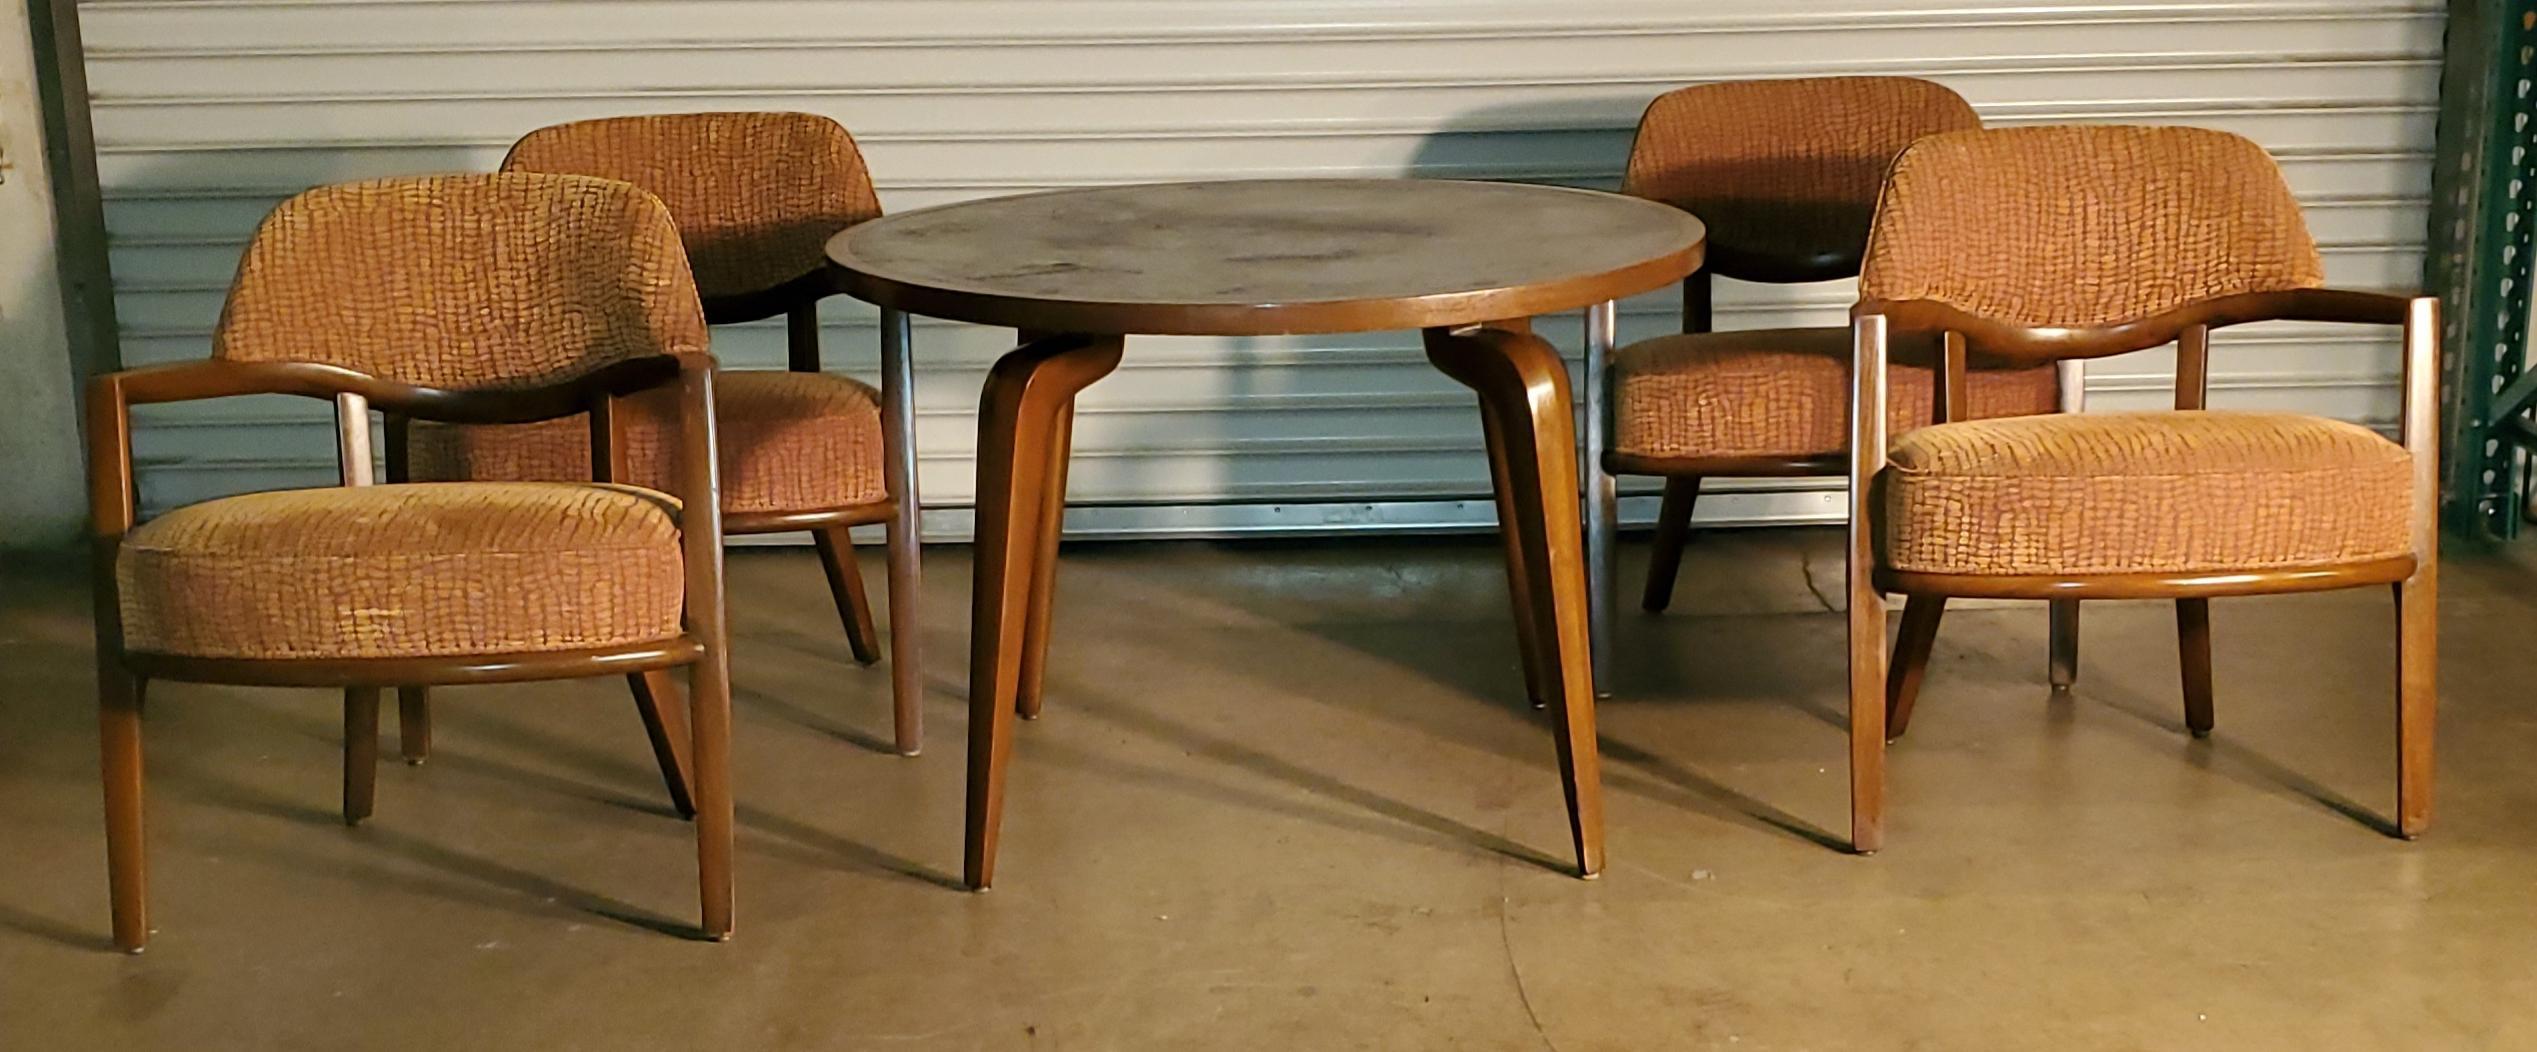 RARE 1950s Maurice Bailey Monteverdi Young Card Table & 4 Maurice Bailey Chairs For Sale 8